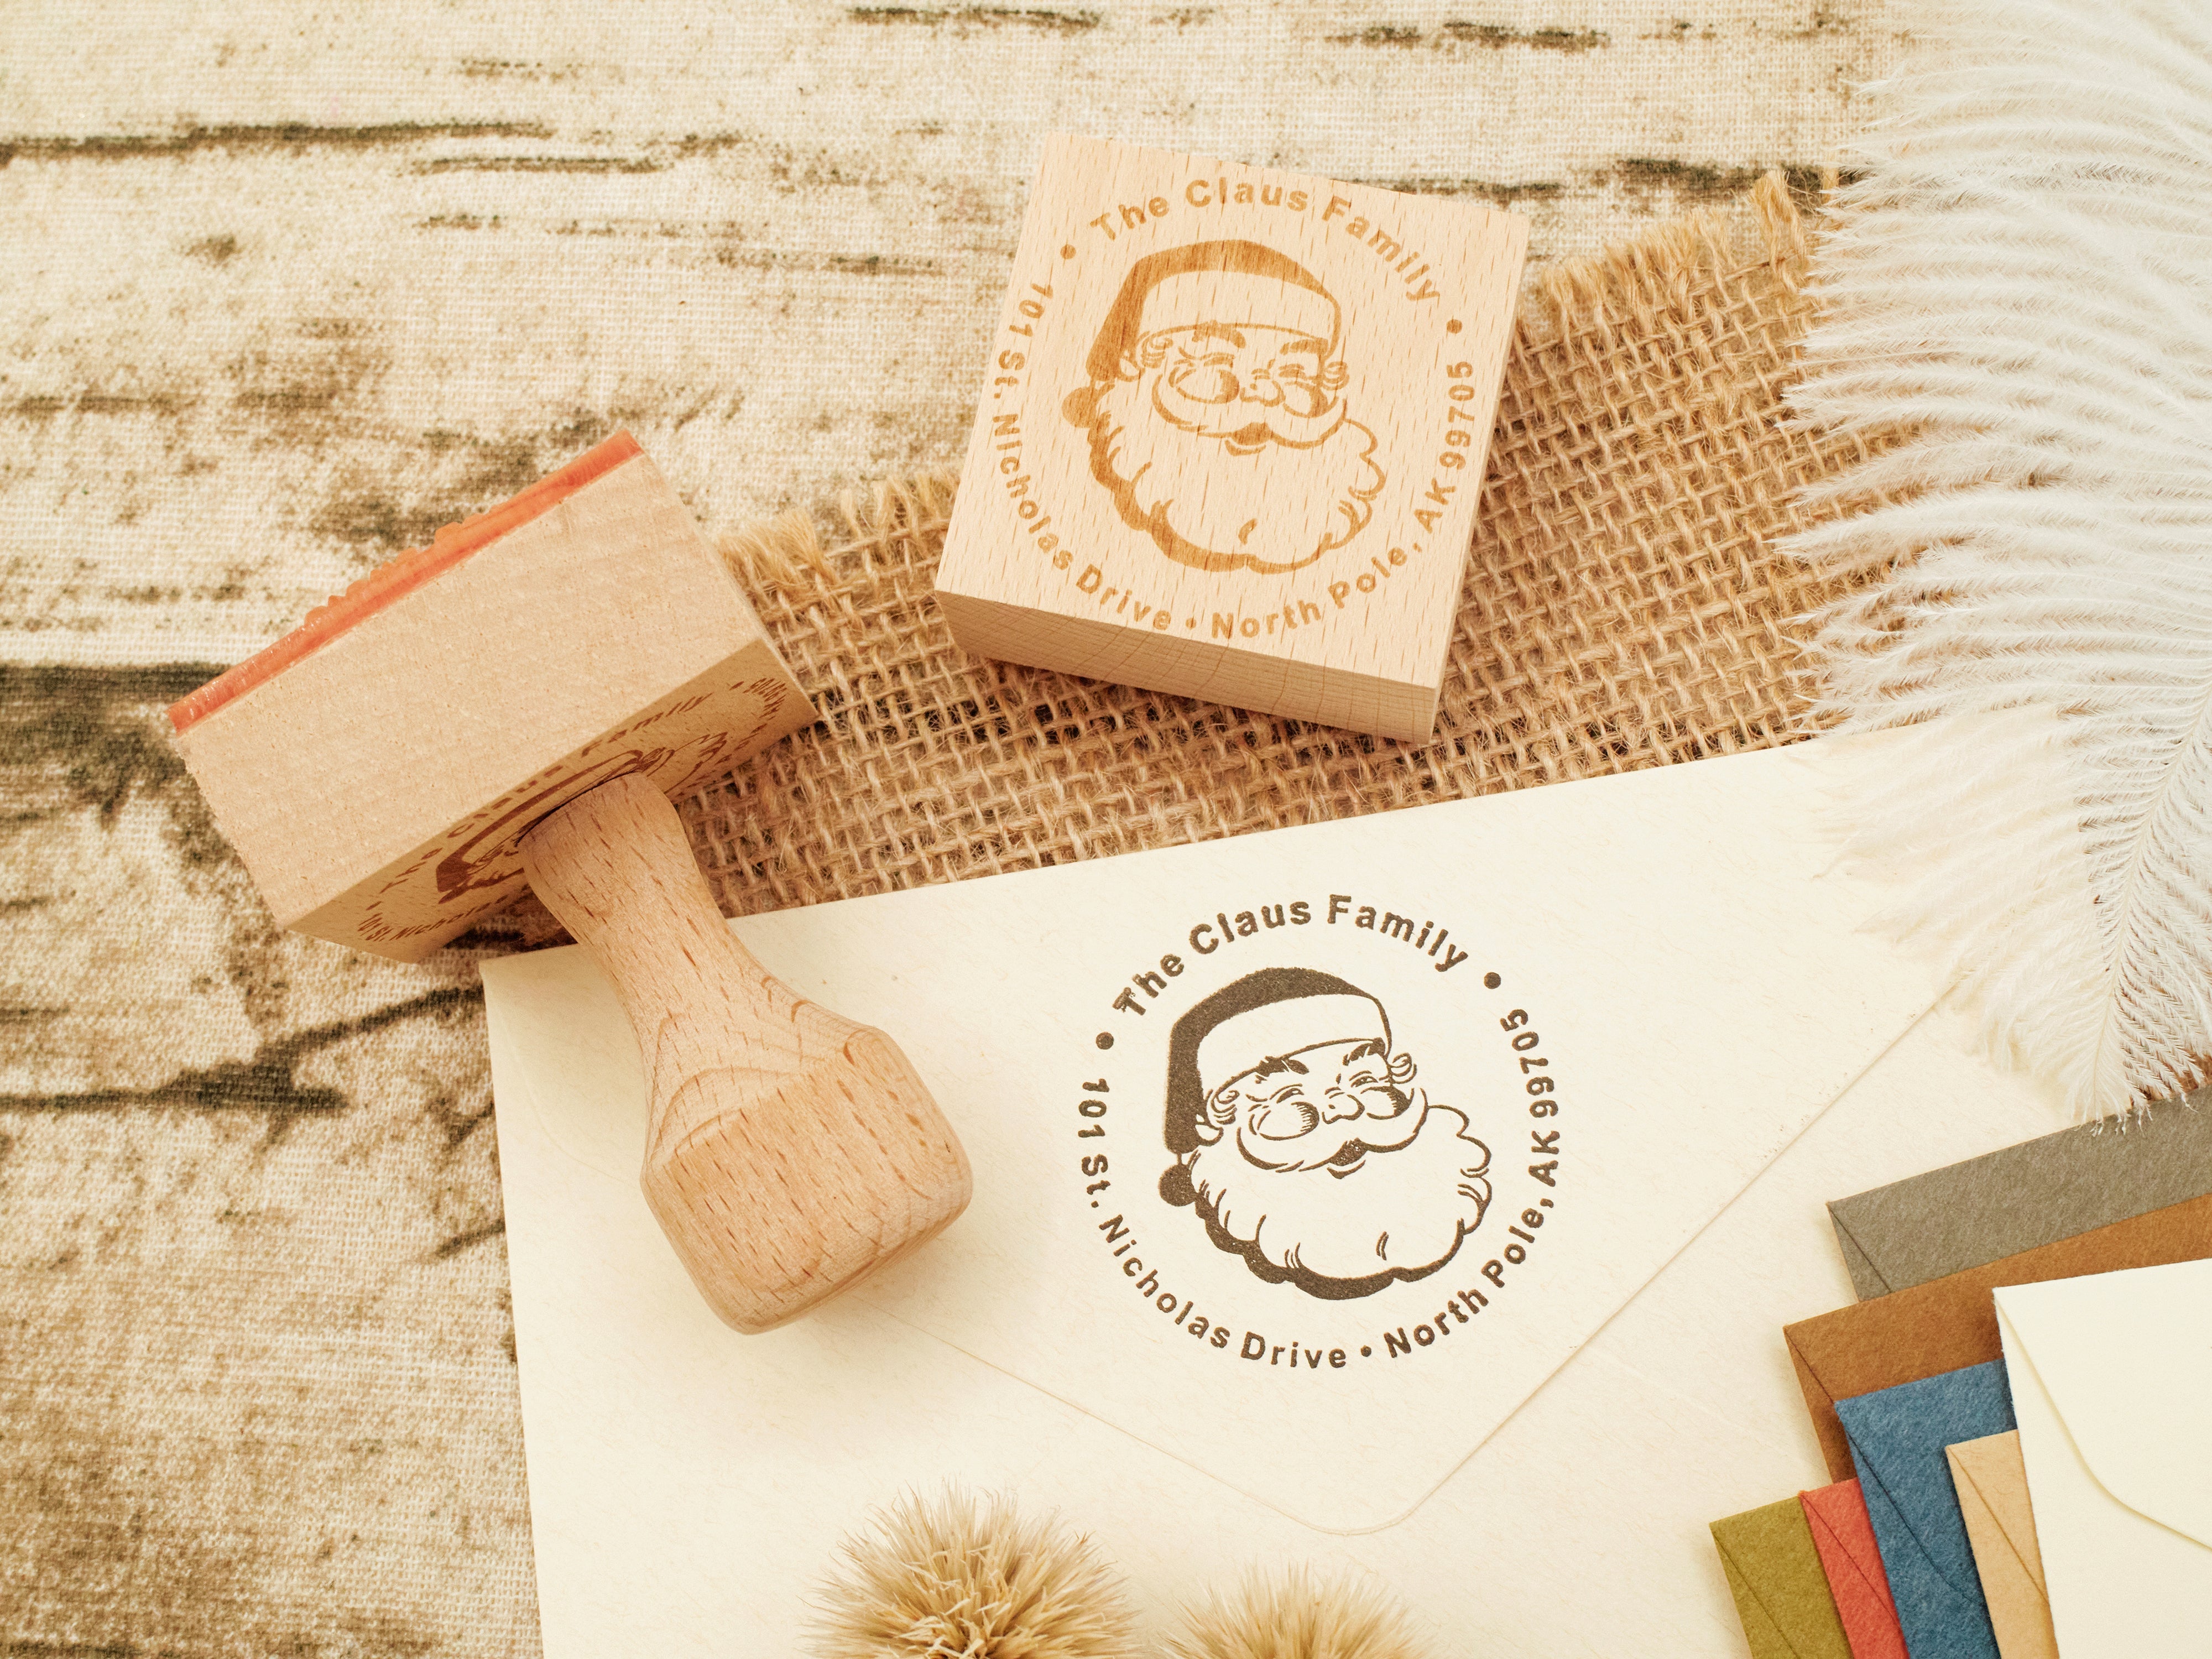 Ready Made Rubber Stamp - Glitter Daily Series Mini Wooden Rubber Stamp Set